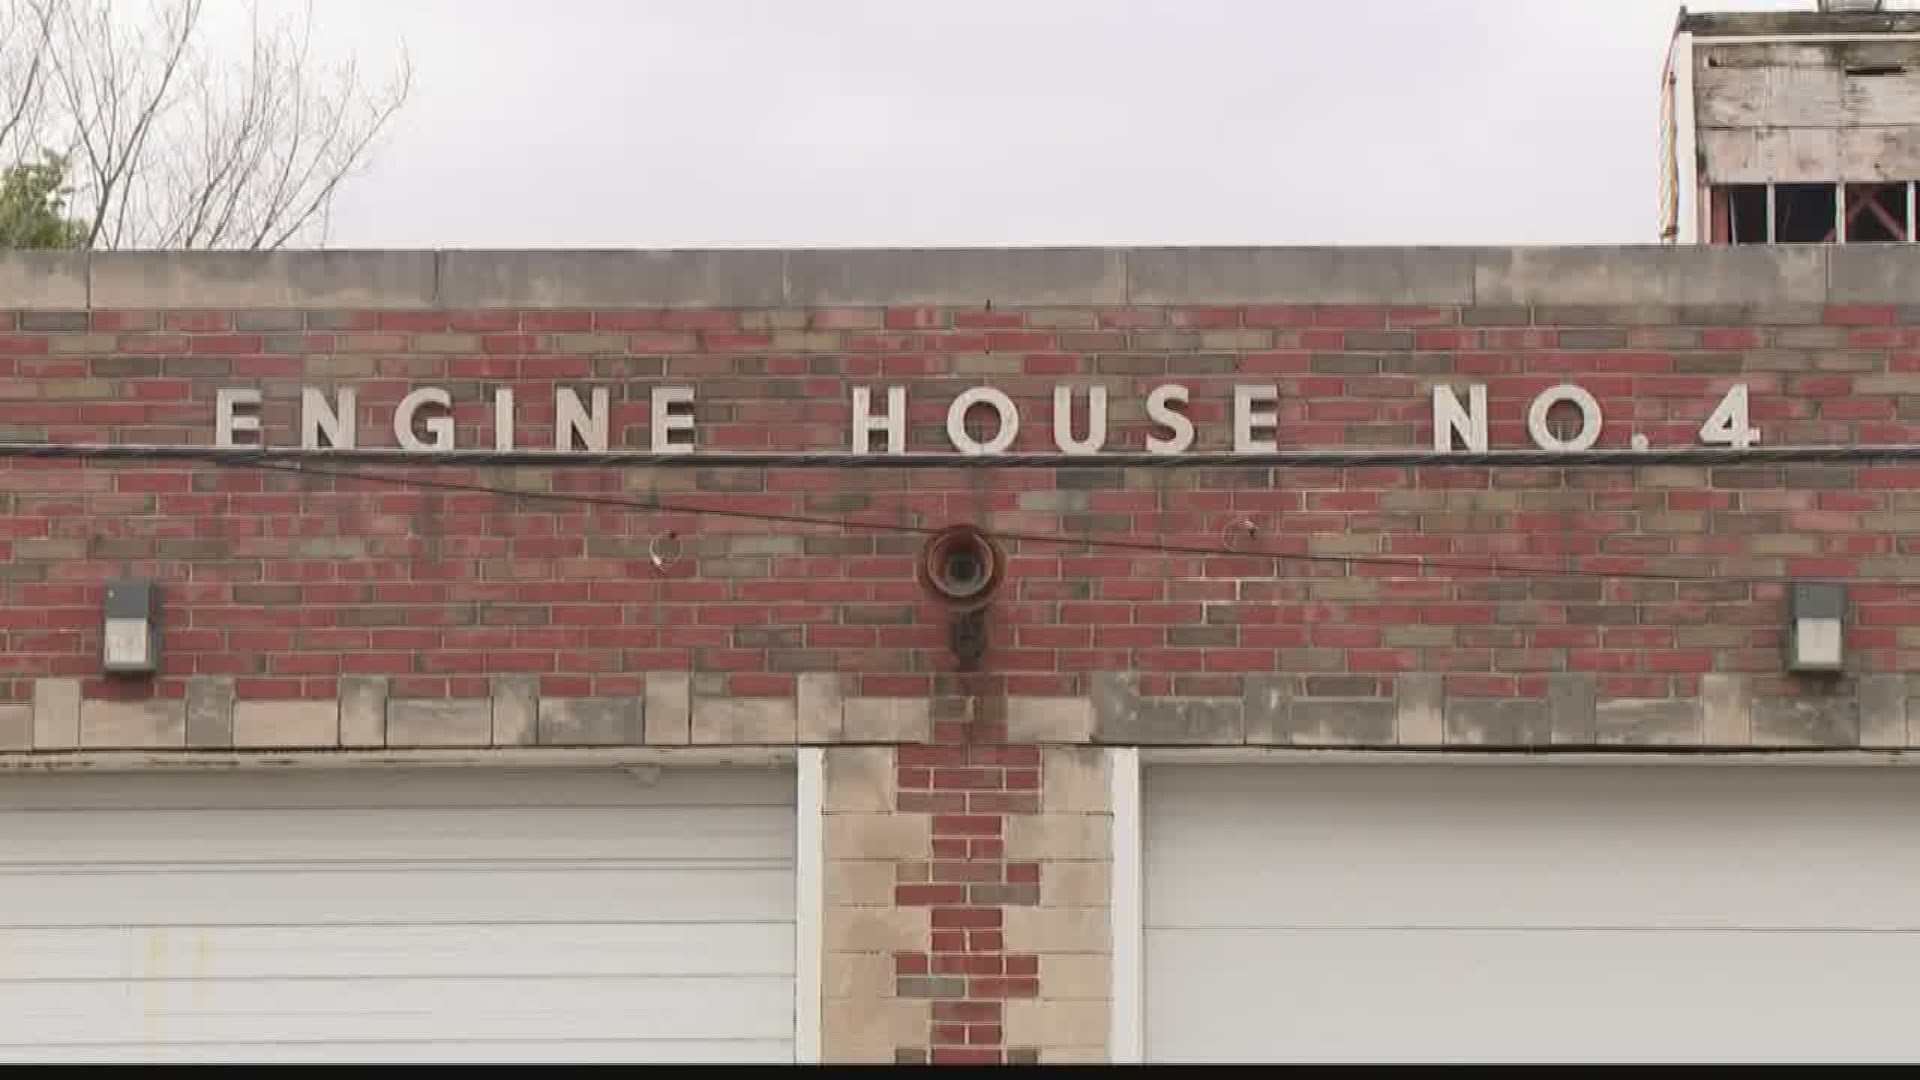 The city is also temporarily closing one of its firehouses.